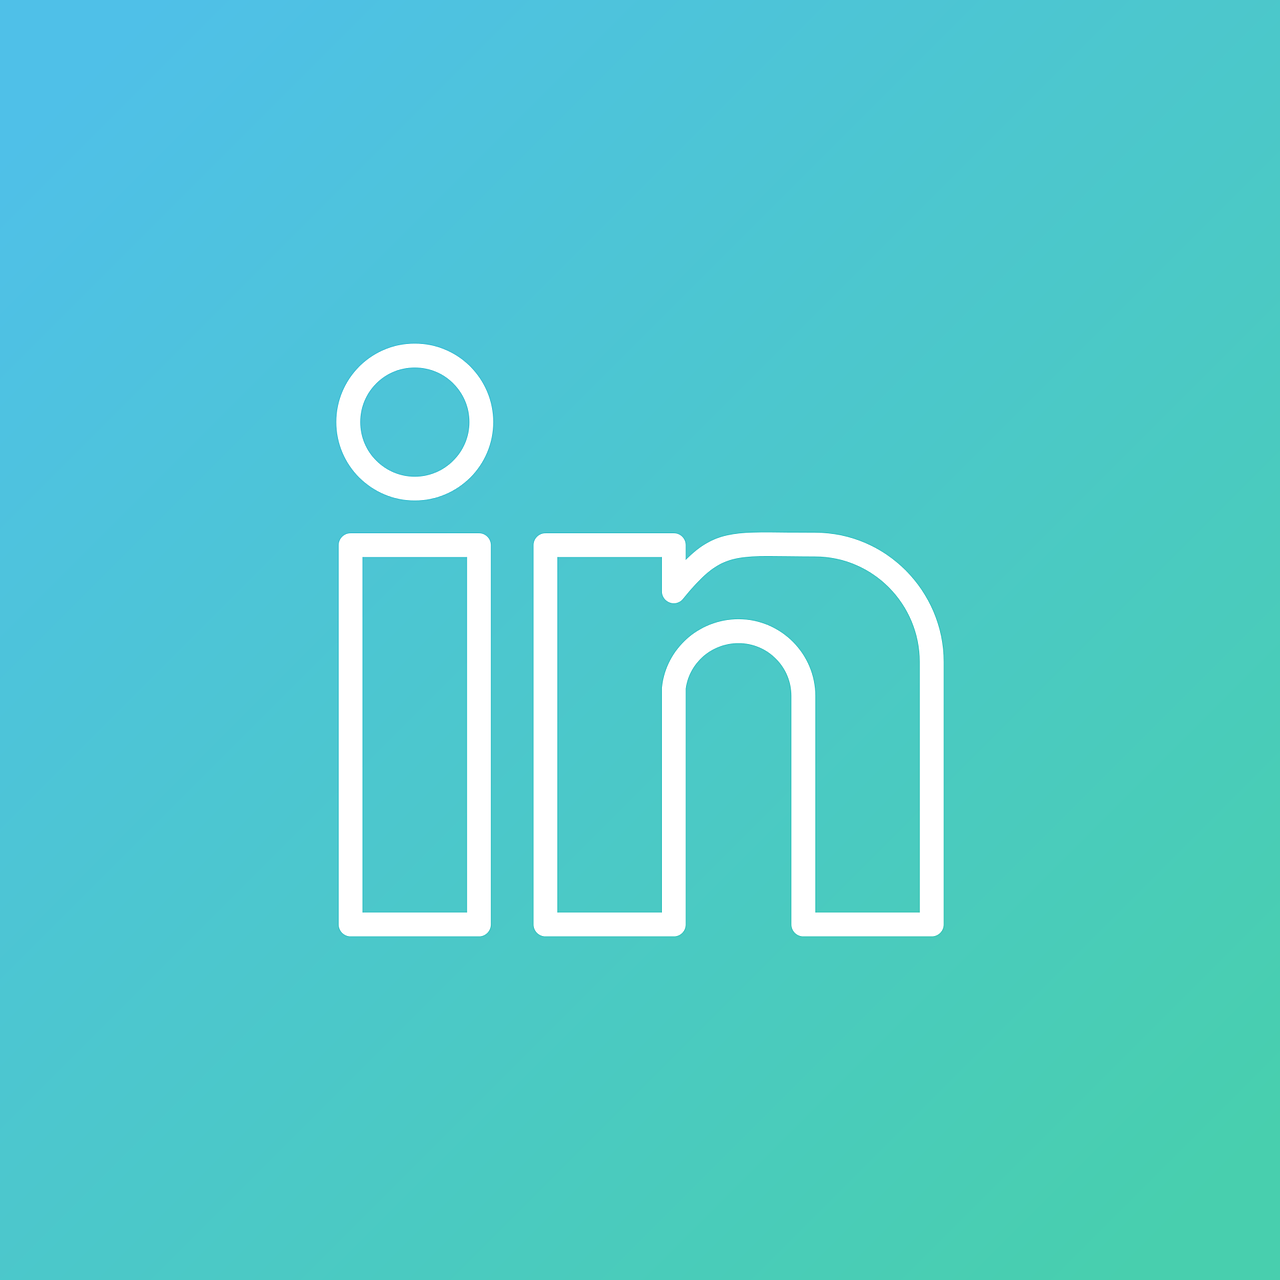 a white linked icon on a blue and green background, lineart, instagram, mingei, linkedin, ilm, rounded logo, s line